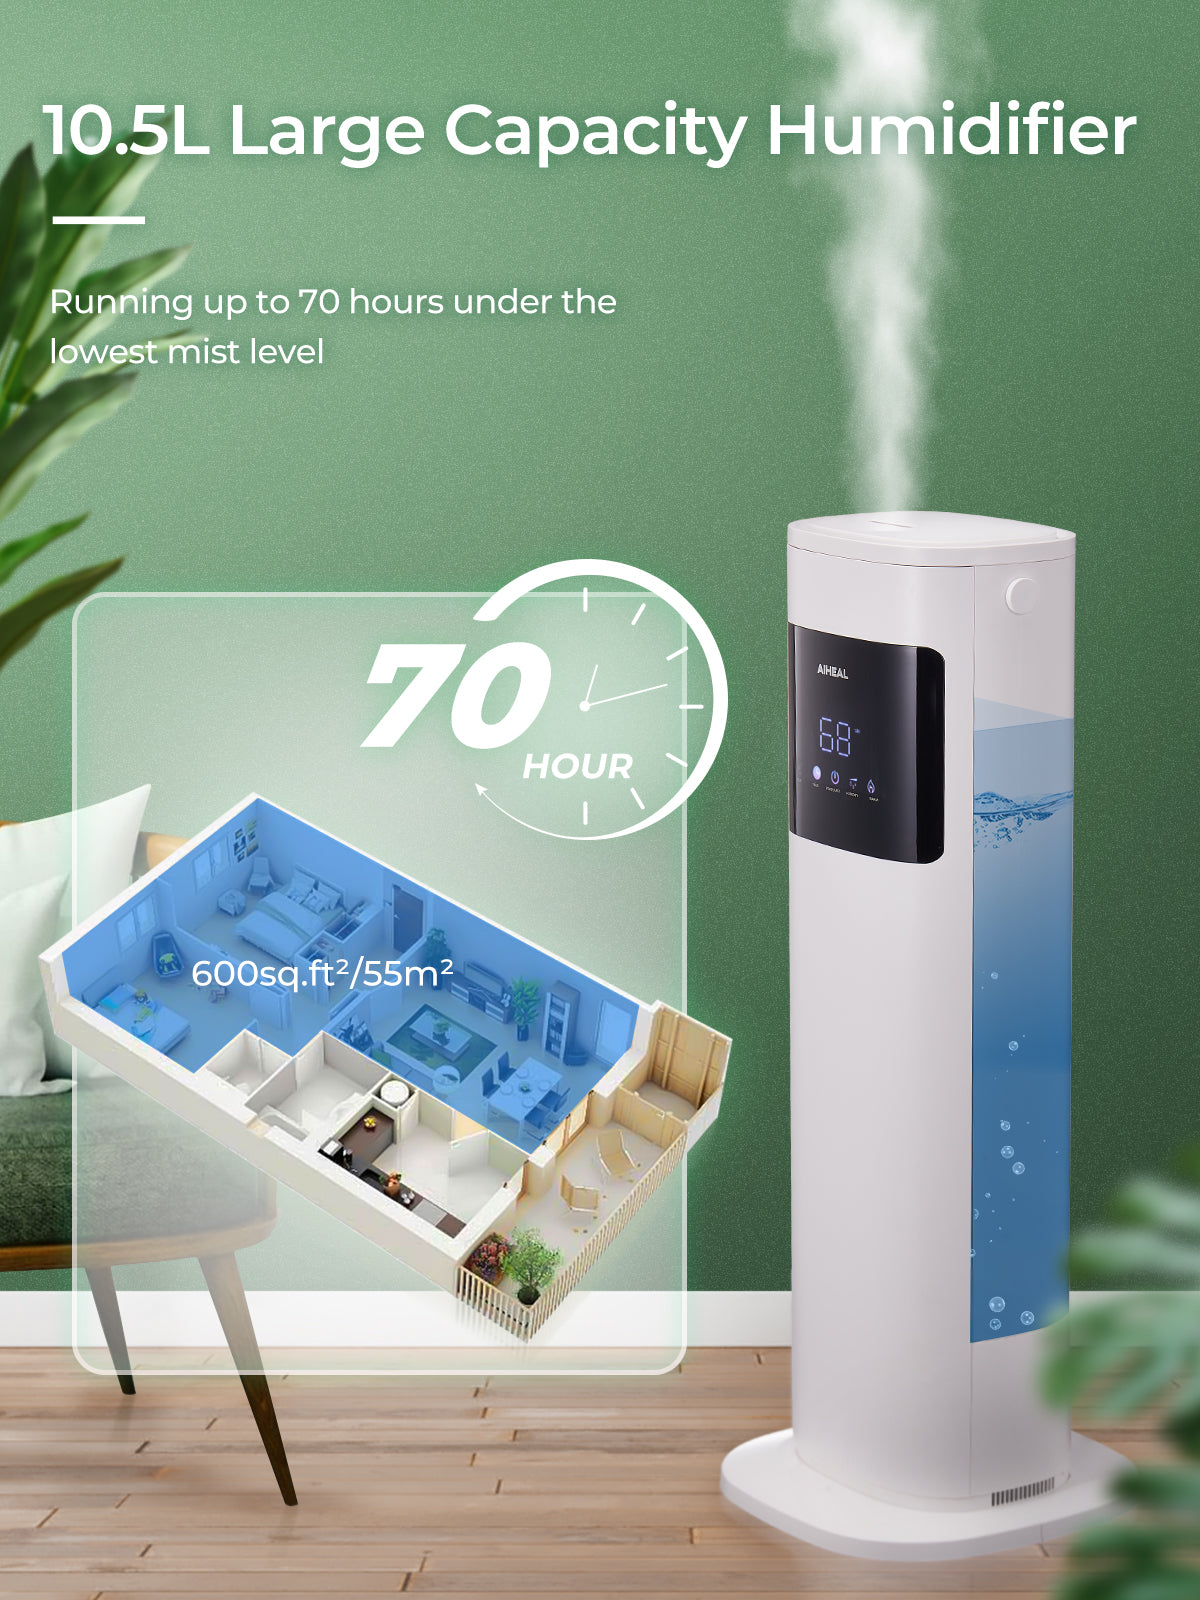 Aiheal Humidifier for Large Room Home, 10.5L Top Fill Cool and Warm Mist Ultrasonic Floor Humidifiers for Baby and Plants with Customized Humidity, Timer, Sleep Mode, Auto Shut Off, Ultra Quiet